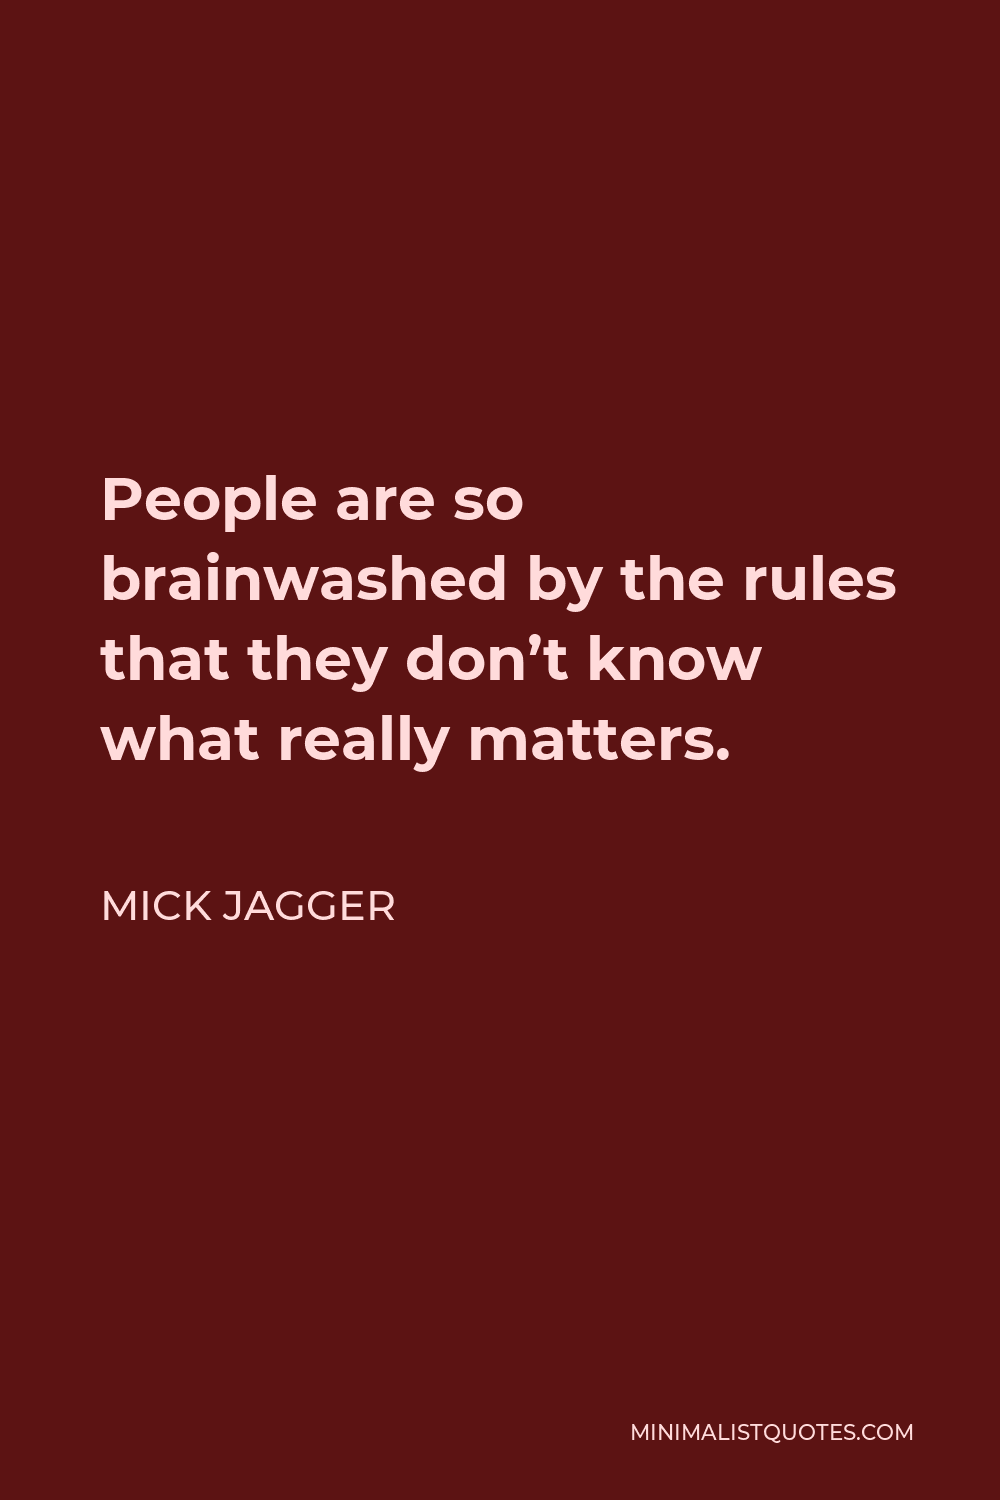 Mick Jagger Quote - People are so brainwashed by the rules that they don’t know what really matters.